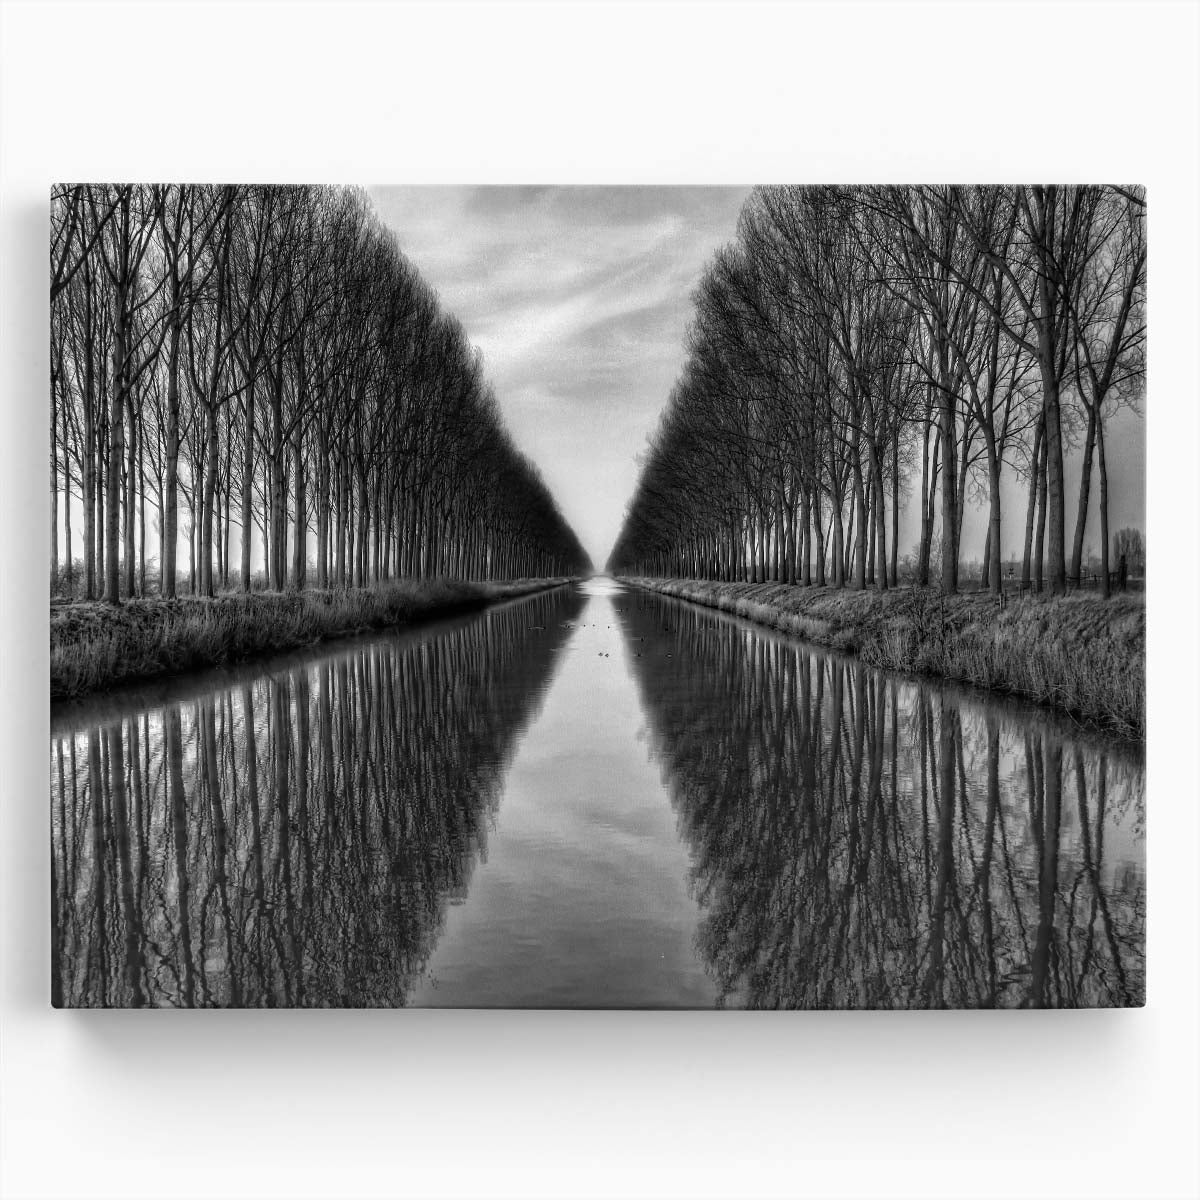 Zeebruges Canal Autumn Reflection Black and White Photography Wall Art by Luxuriance Designs. Made in USA.